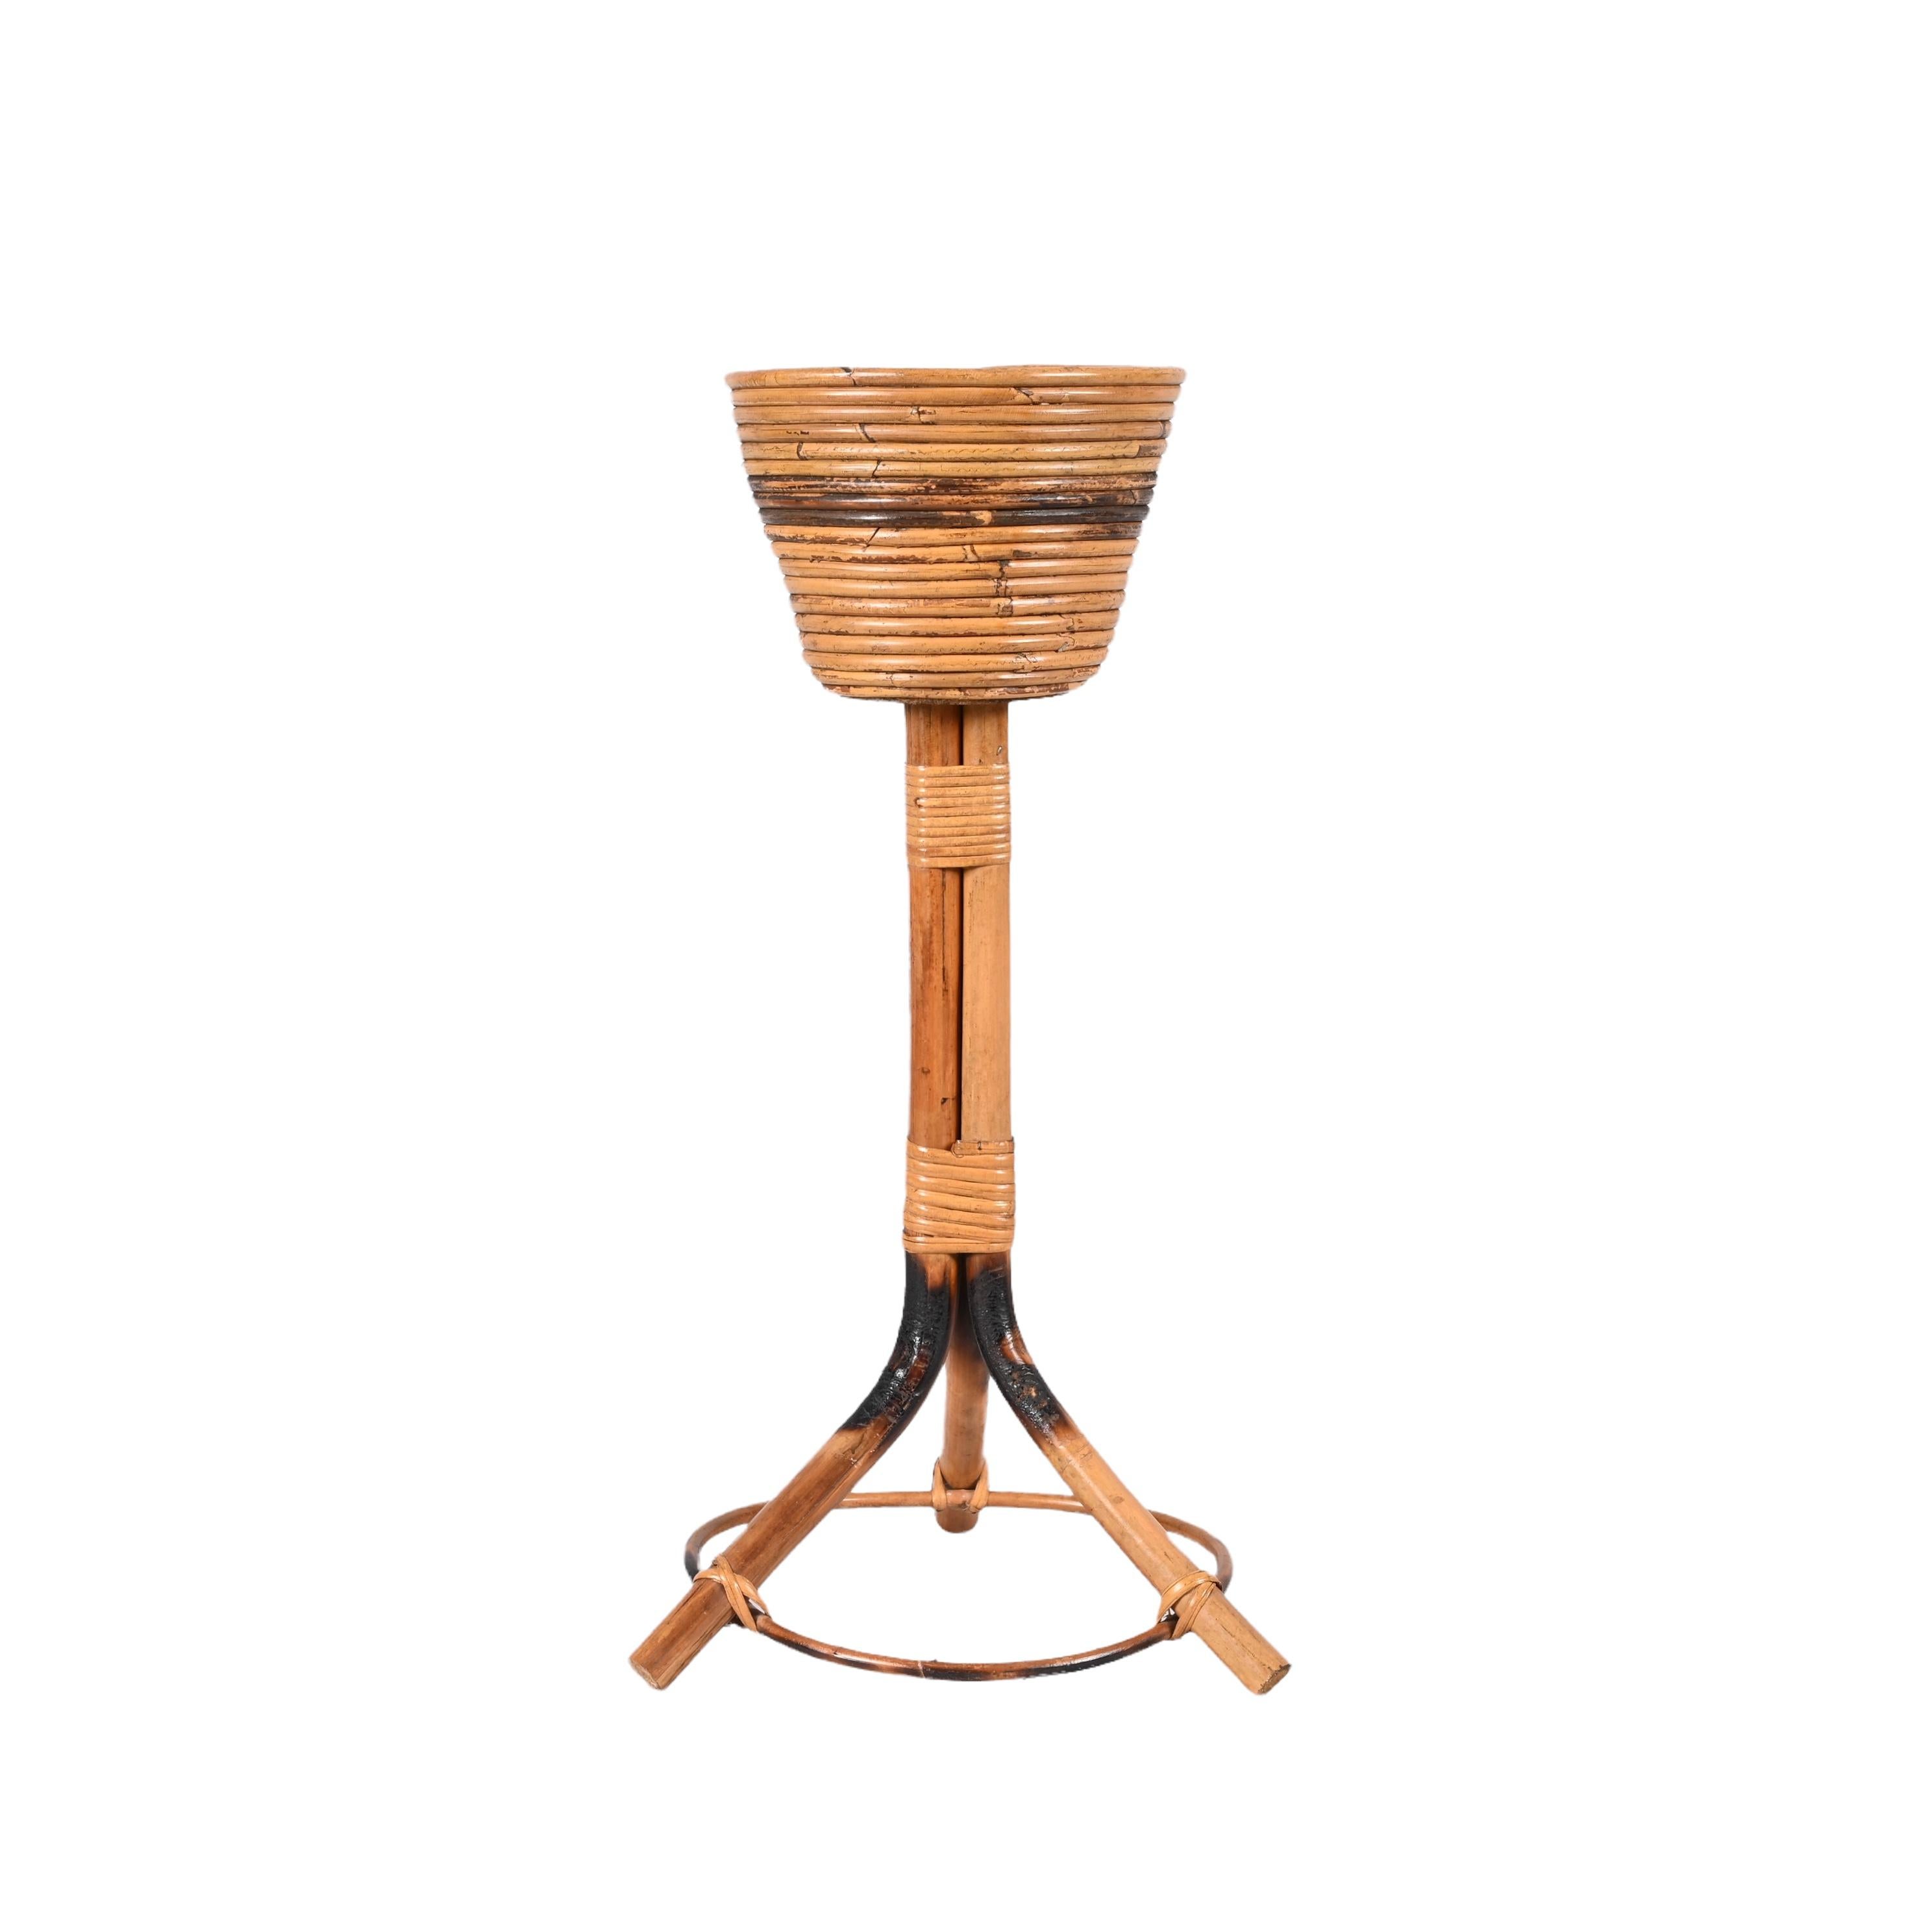 Mid-Century Modern Midcentury Italian Bamboo Cane and Rattan Round Plant Holder, 1950s For Sale